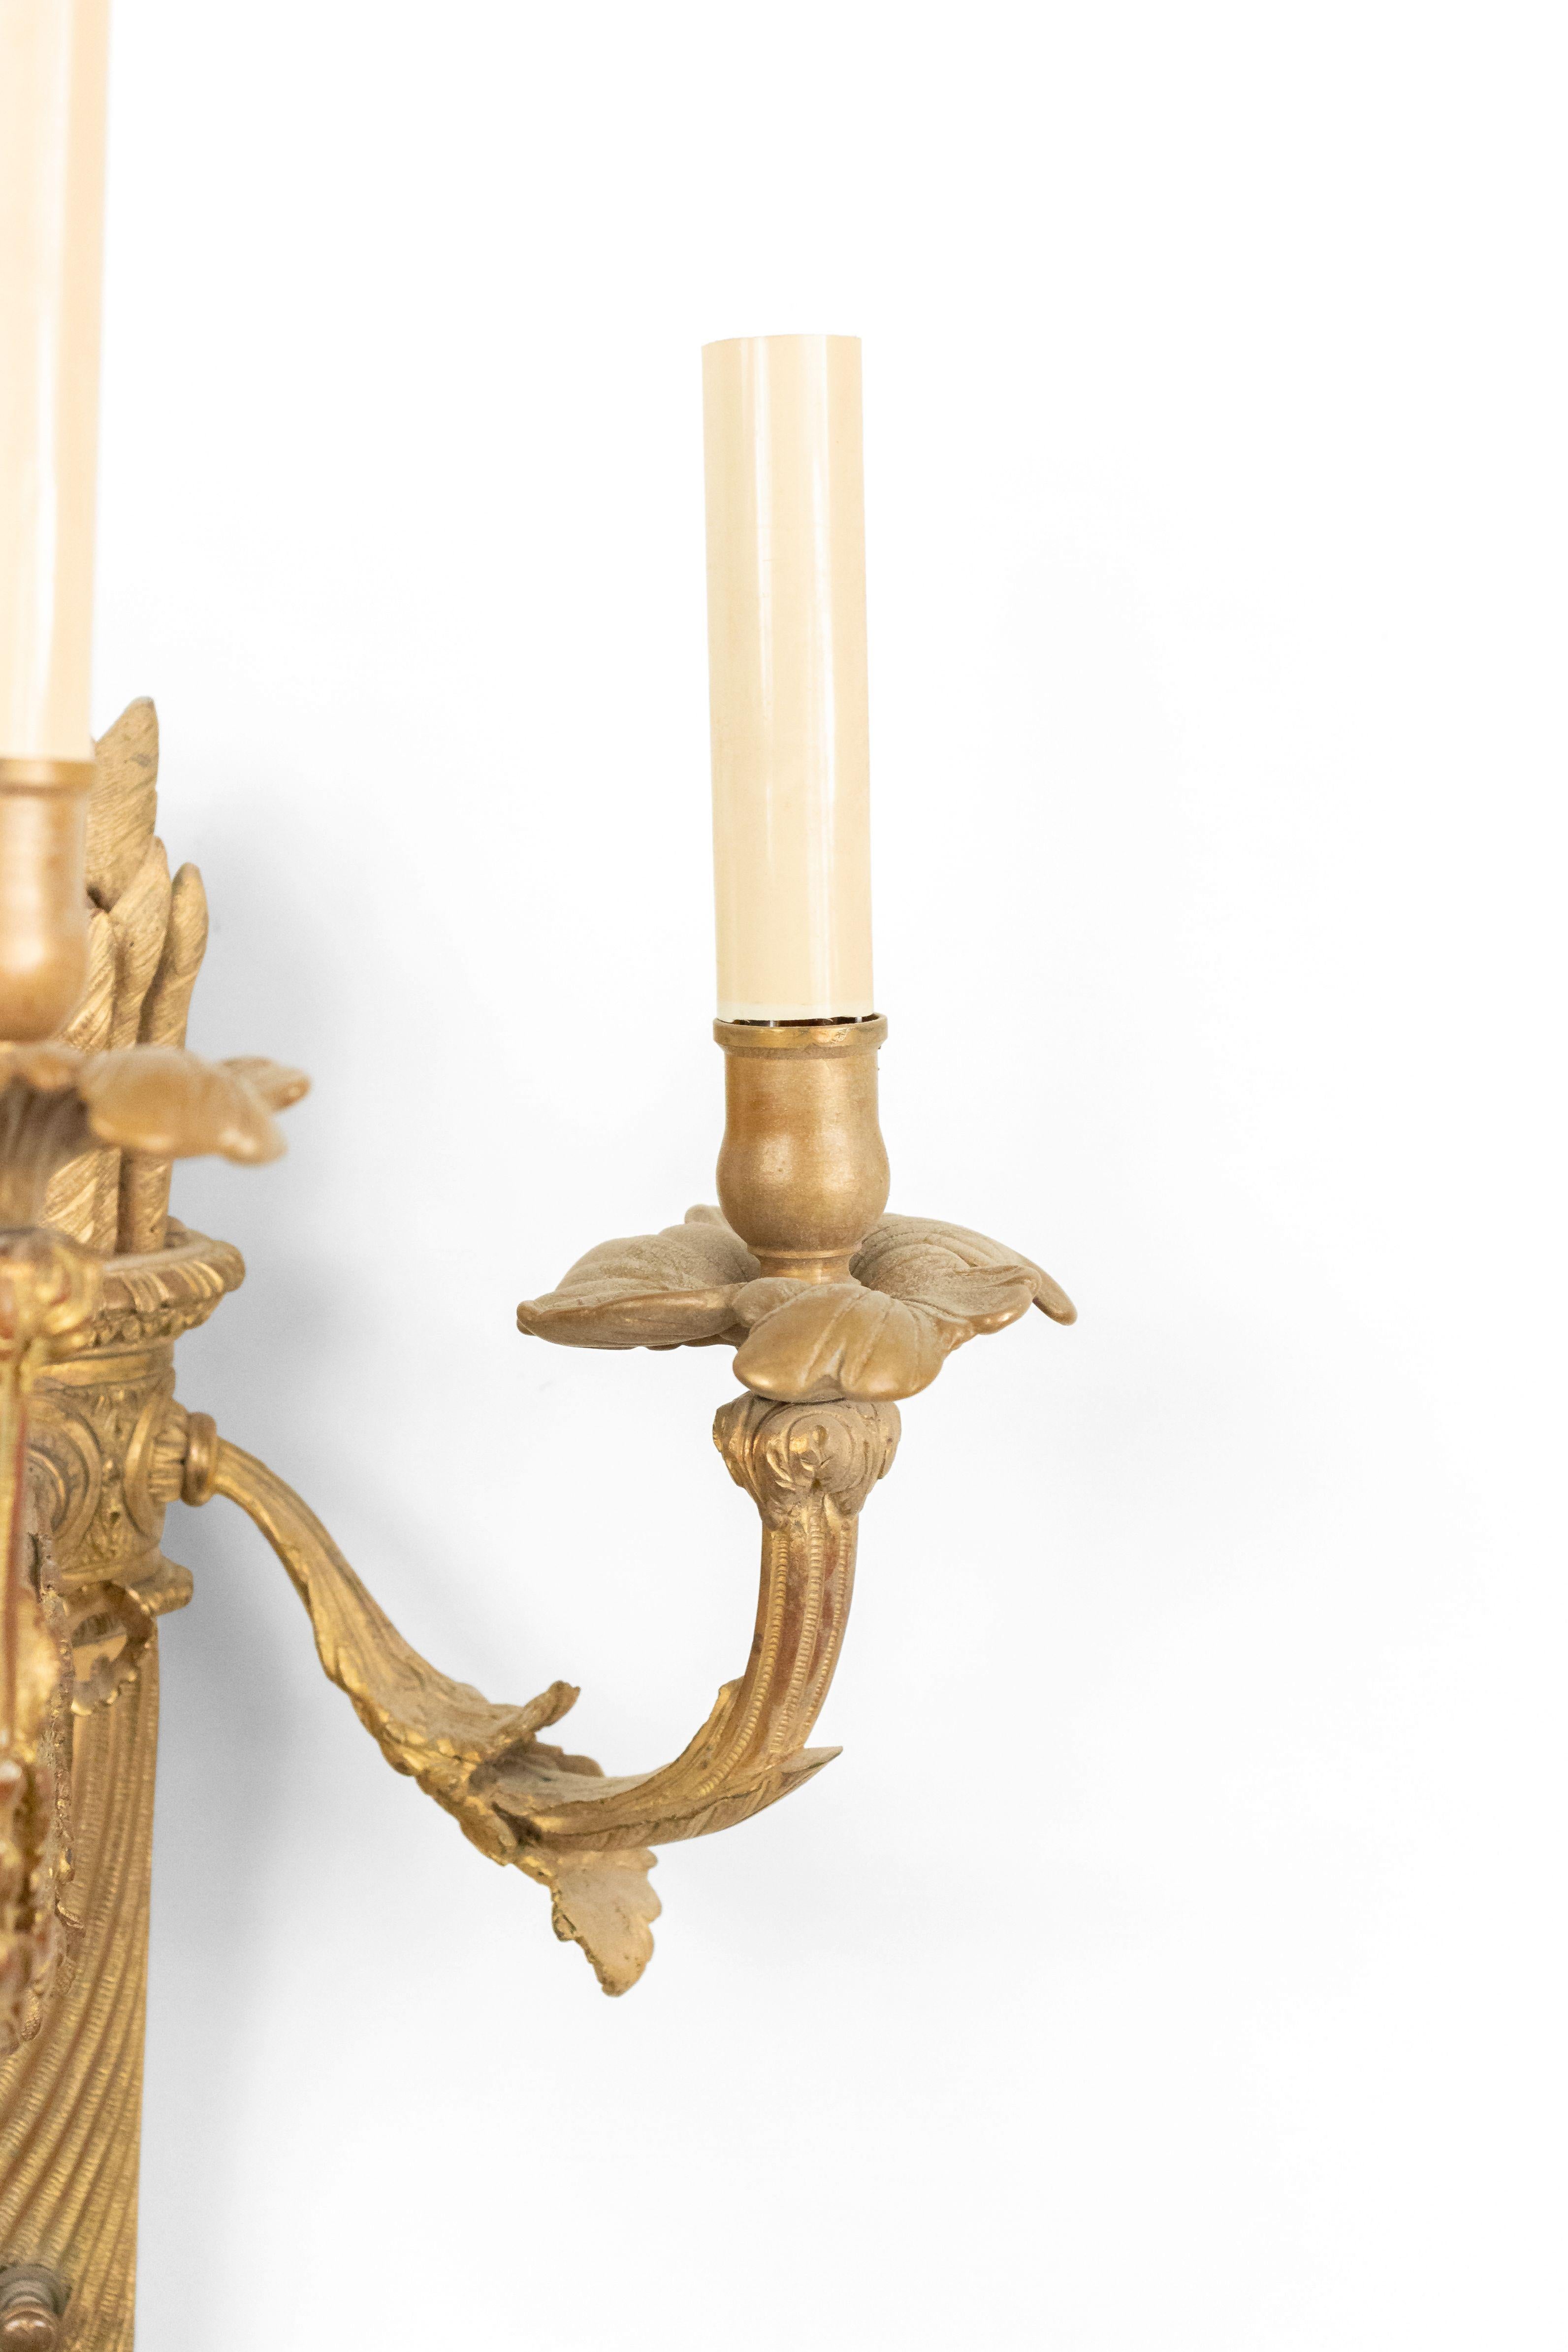 Pair of French Louis XVI style bronze dore 3 arm wall sconces with torch design and arrow top (19th Century).